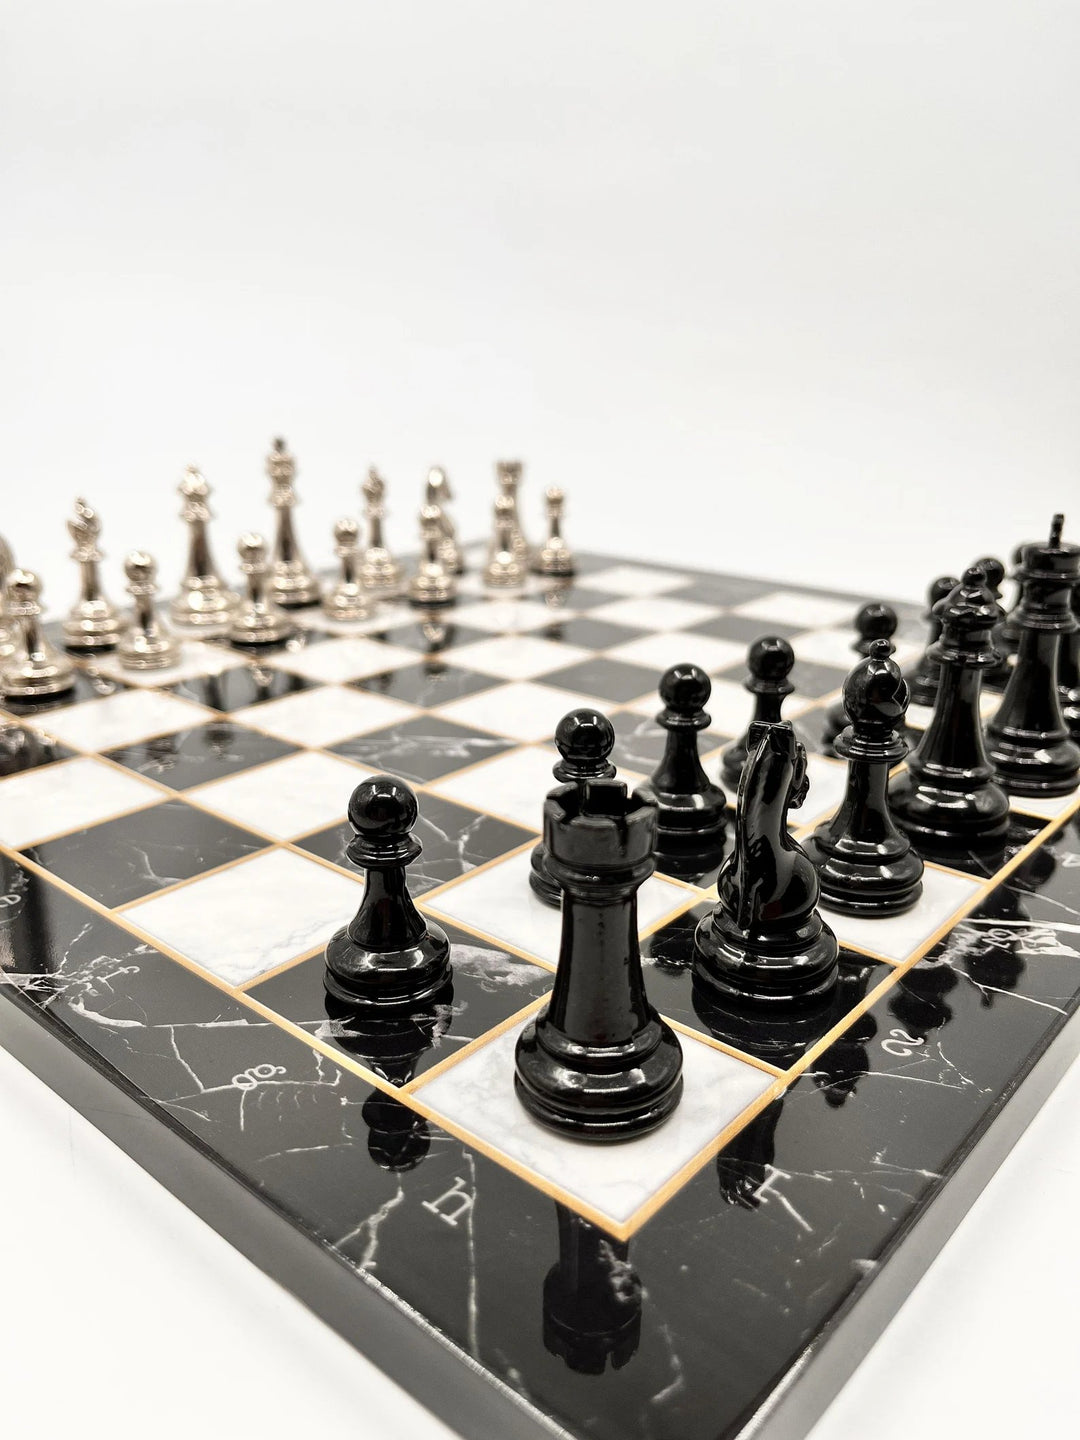 Luxury Chess SetsDiscover a variety of beautiful luxury chess sets! Indulge in unparalleled craftsmanship with our luxury chess sets collection. Hand-selected high end chess sets, premium chess boards and much more! Explore the elegant and sophisticed col